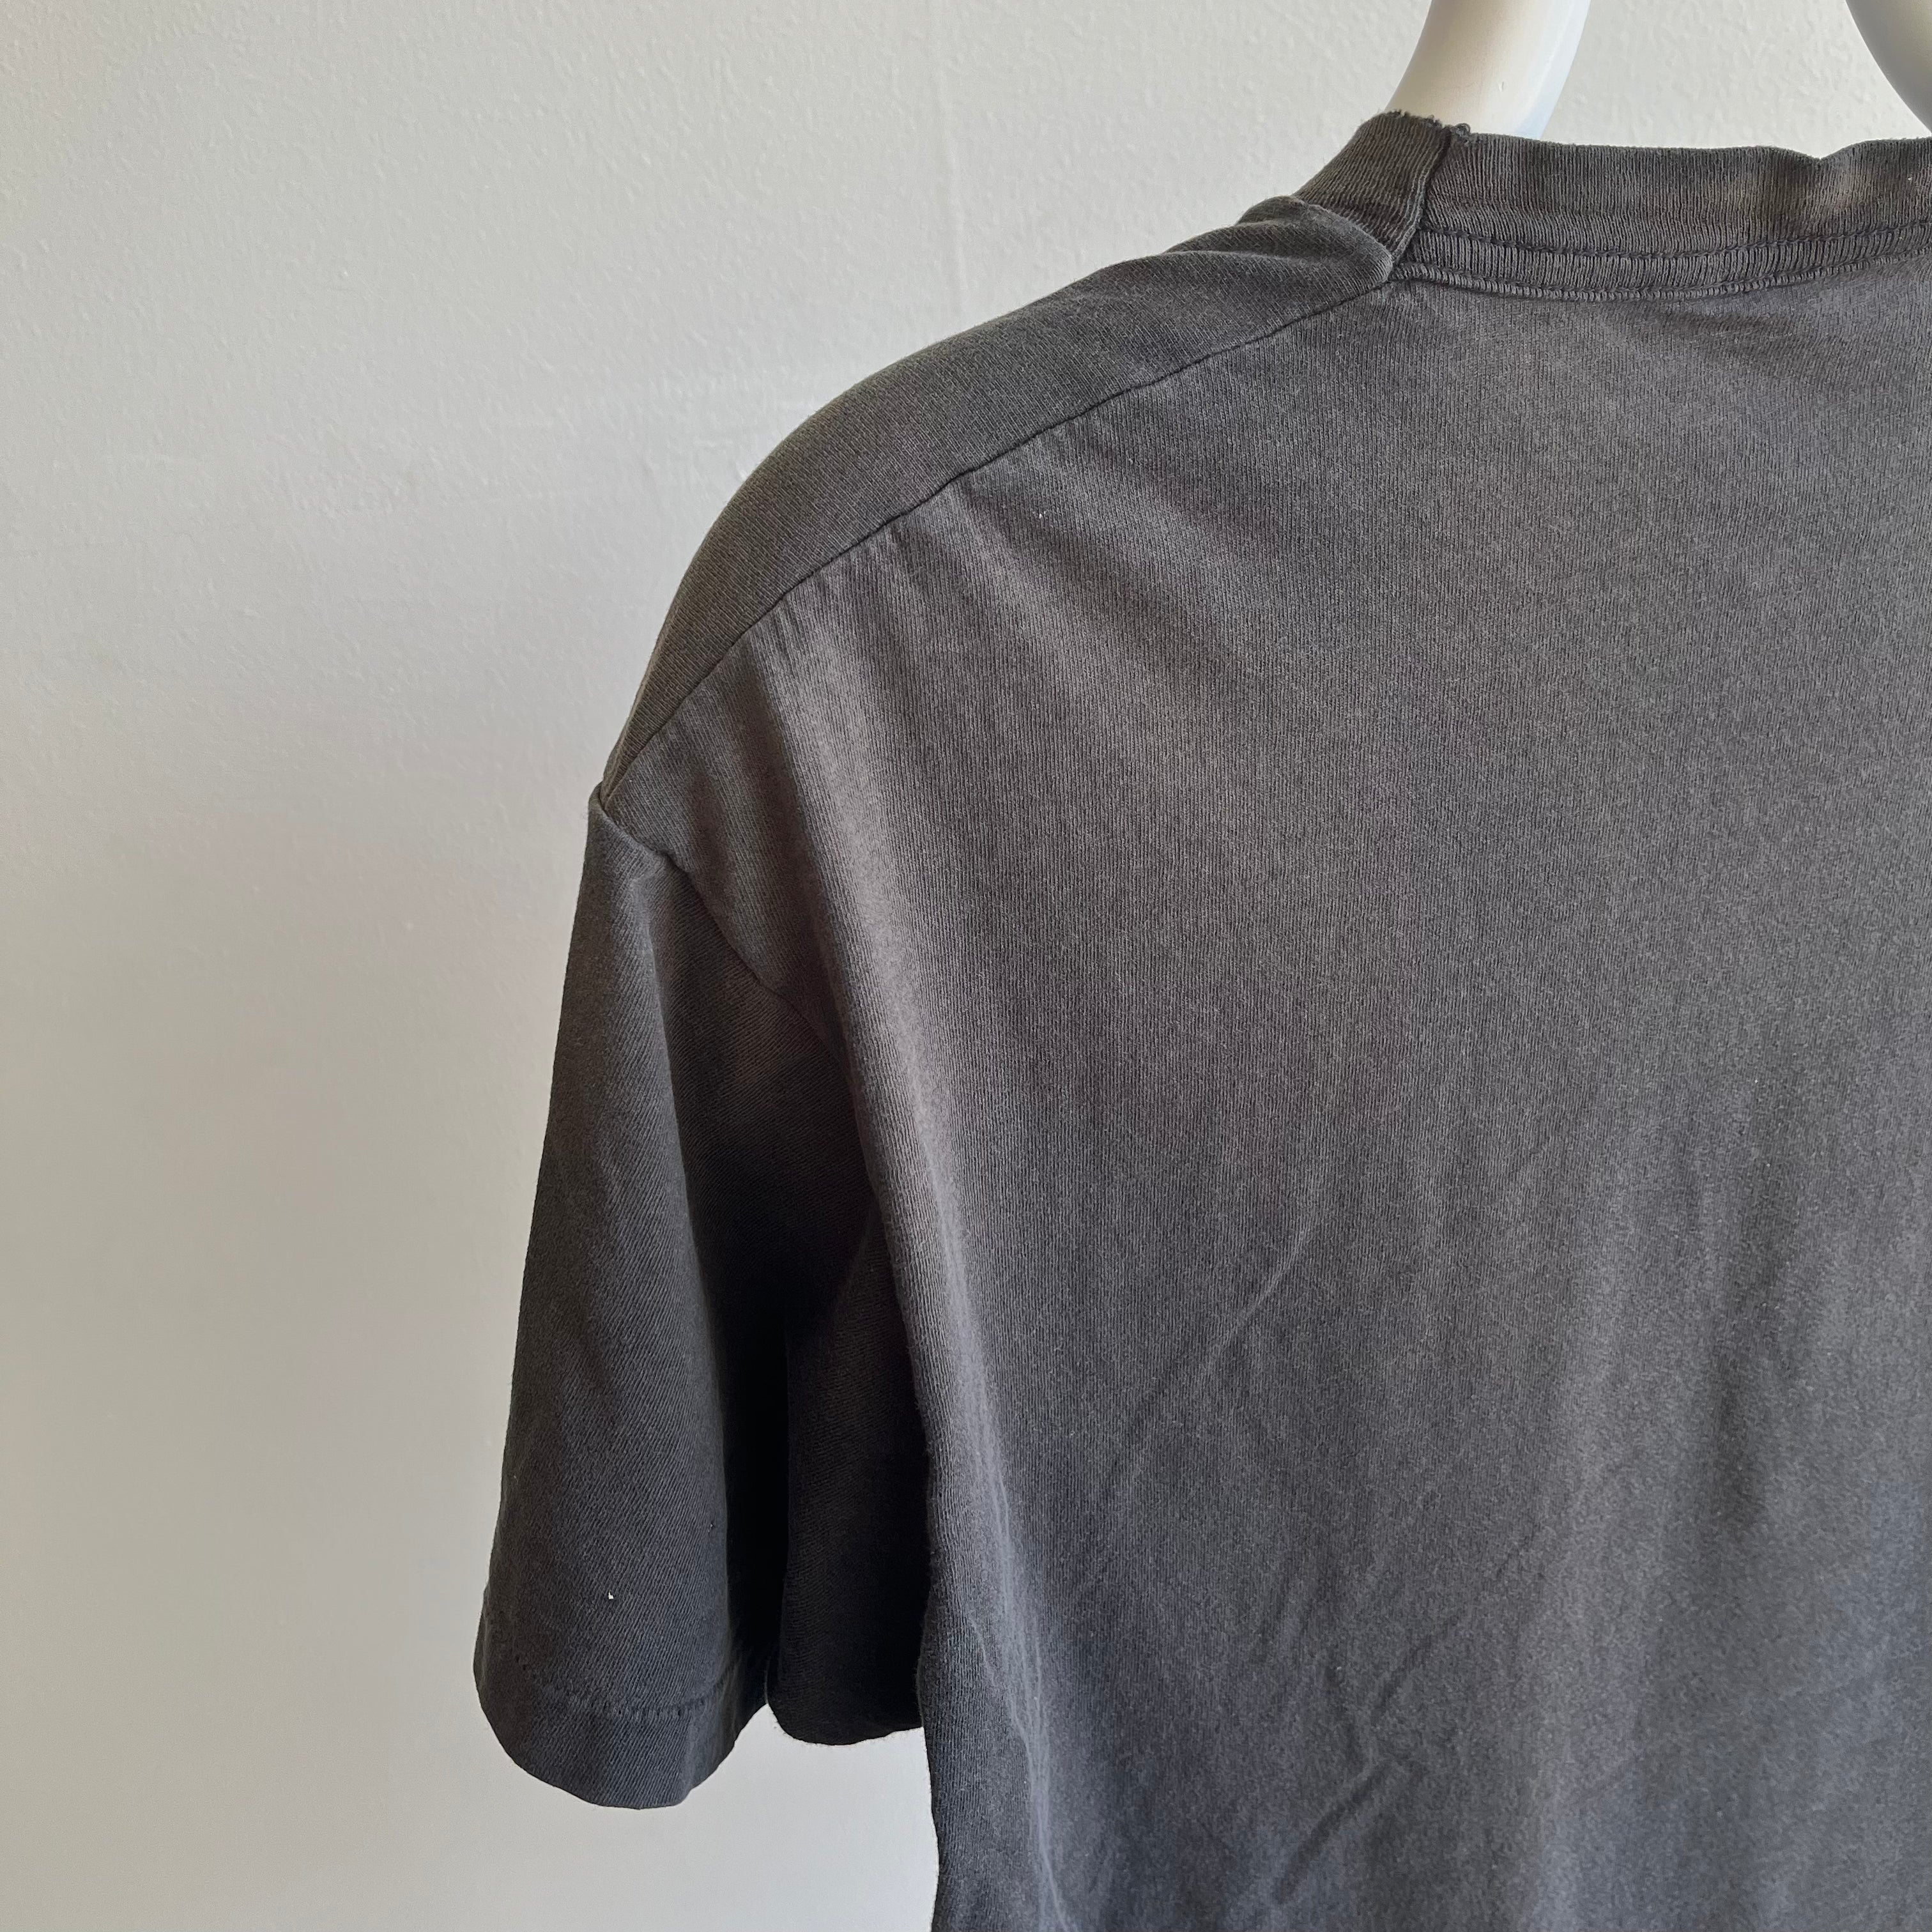 1980s FOTL Faded Blank Black Perfectly Worn and Paint Stained Pocket T-Shirt